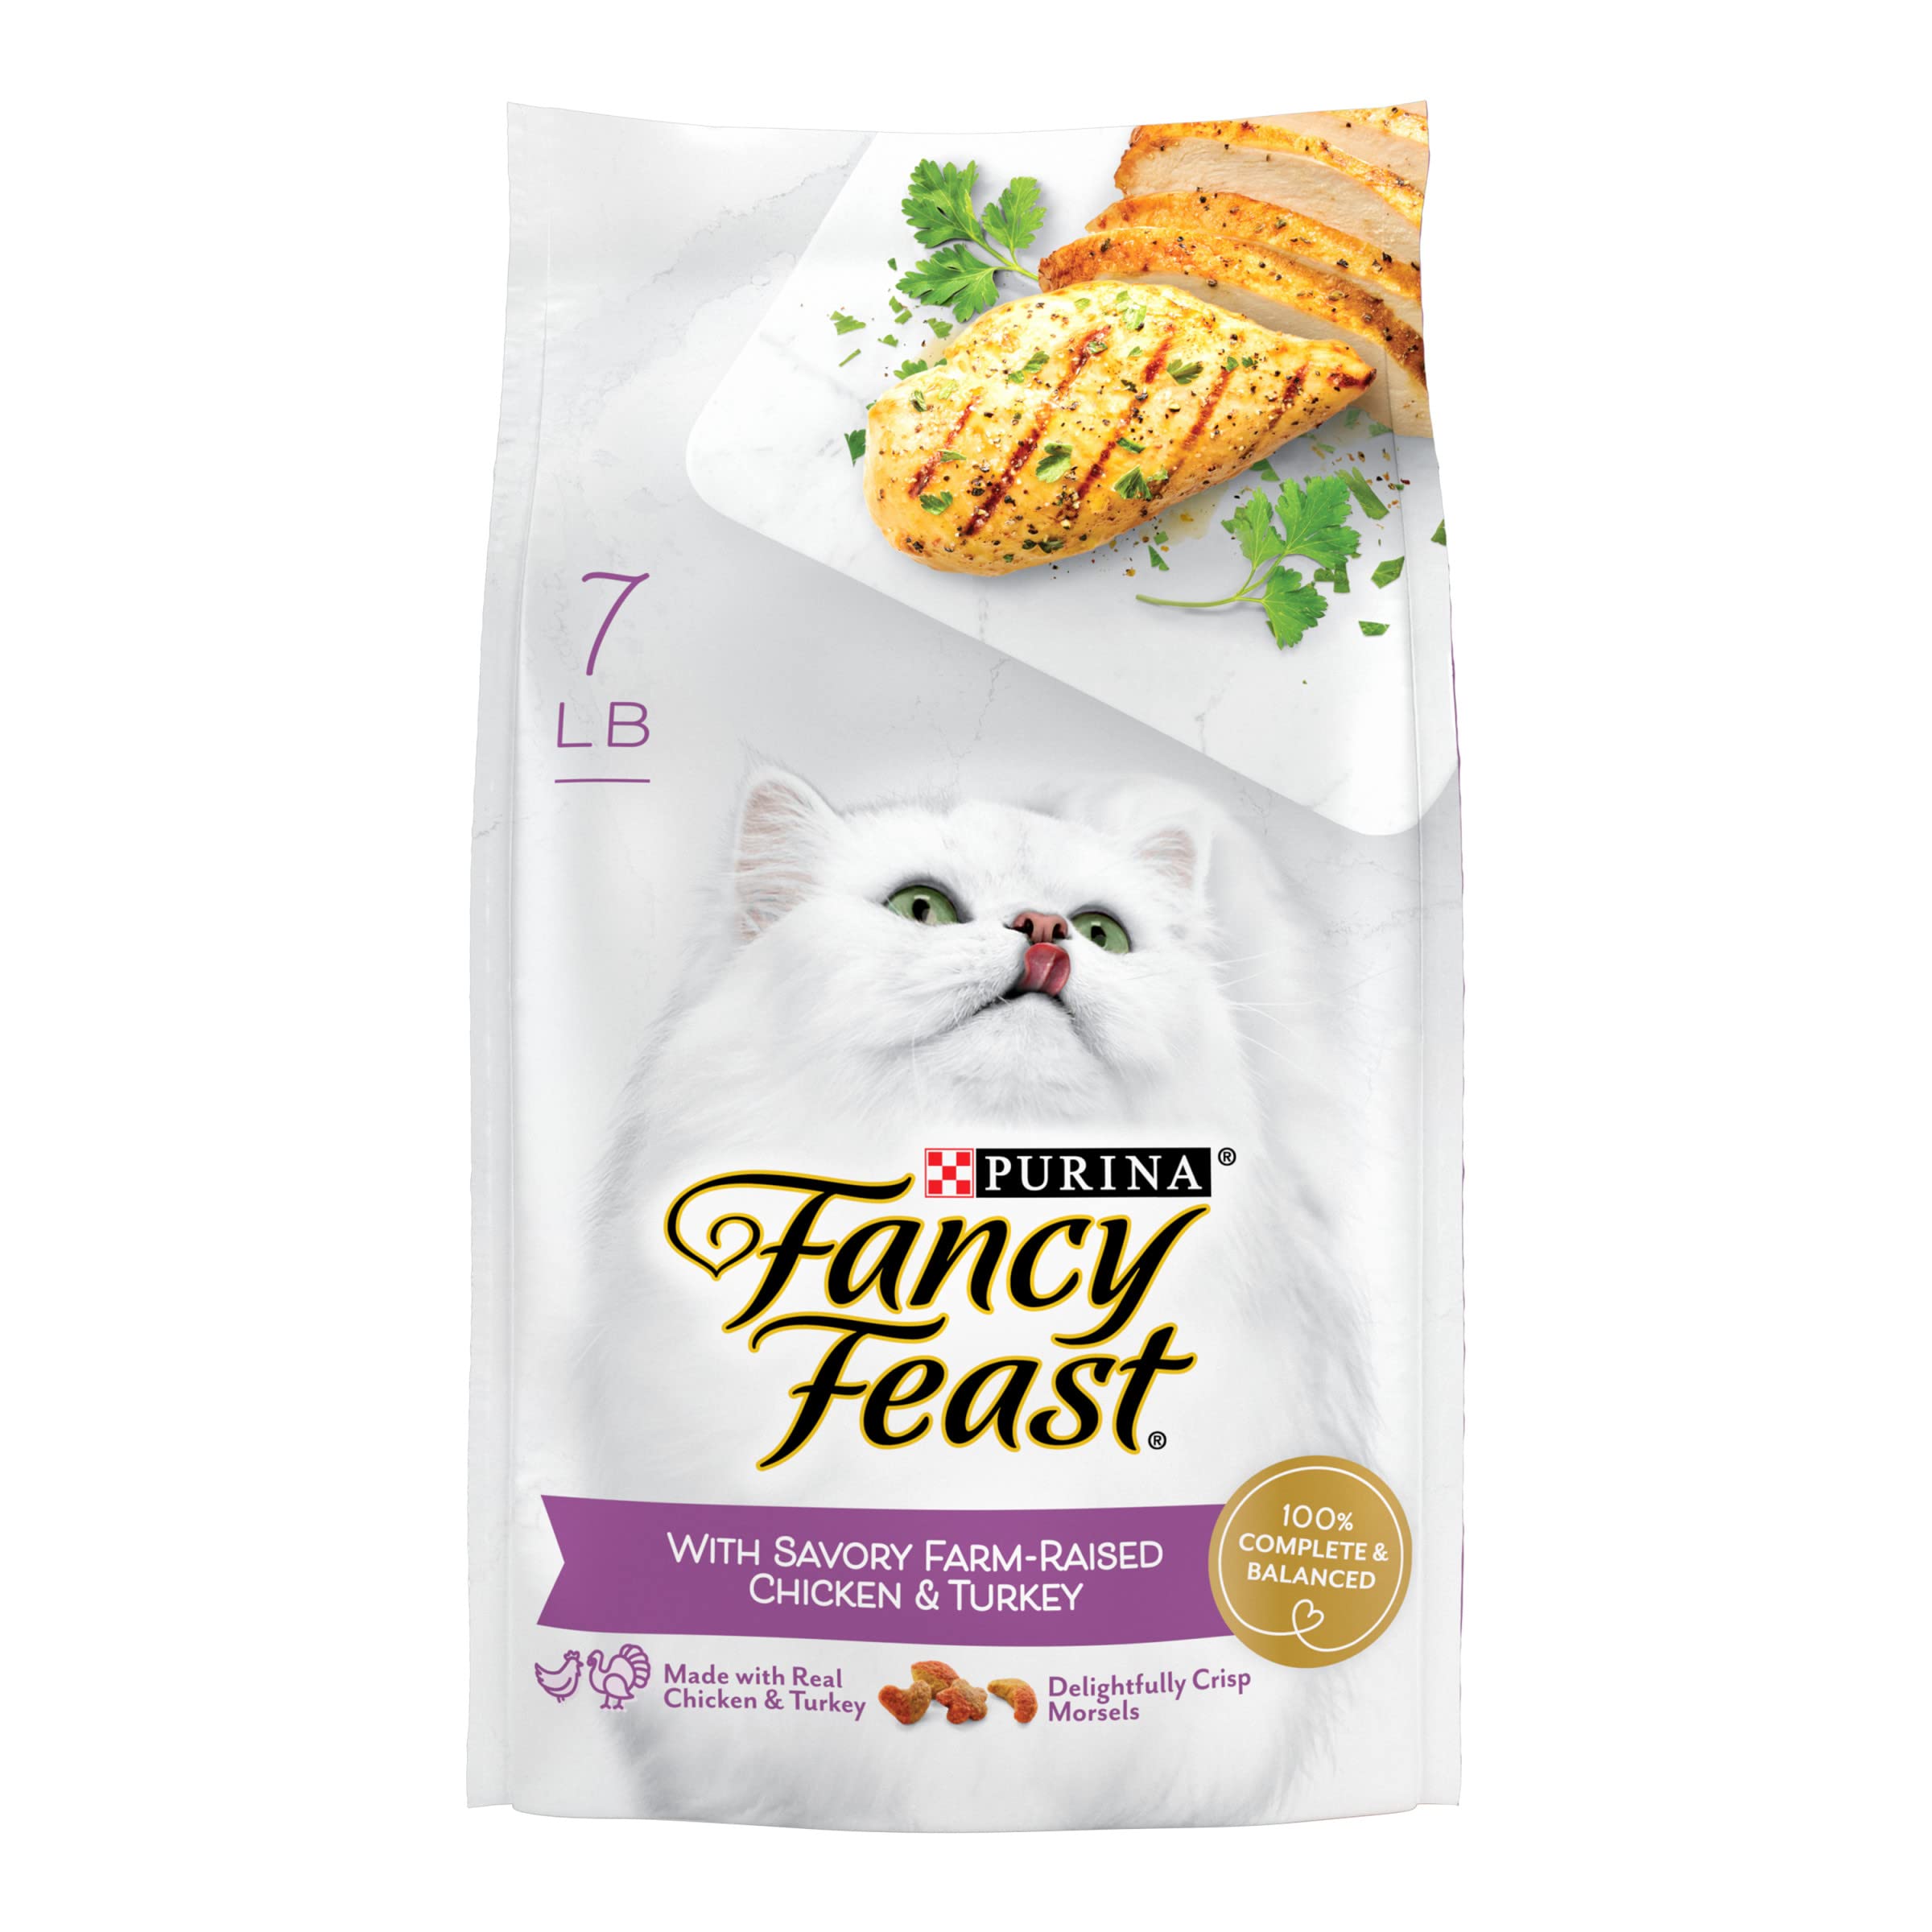 Purina Fancy Feast Savory Chicken and Turkey Dry Cat Food - 7 Lbs - Case of 4  